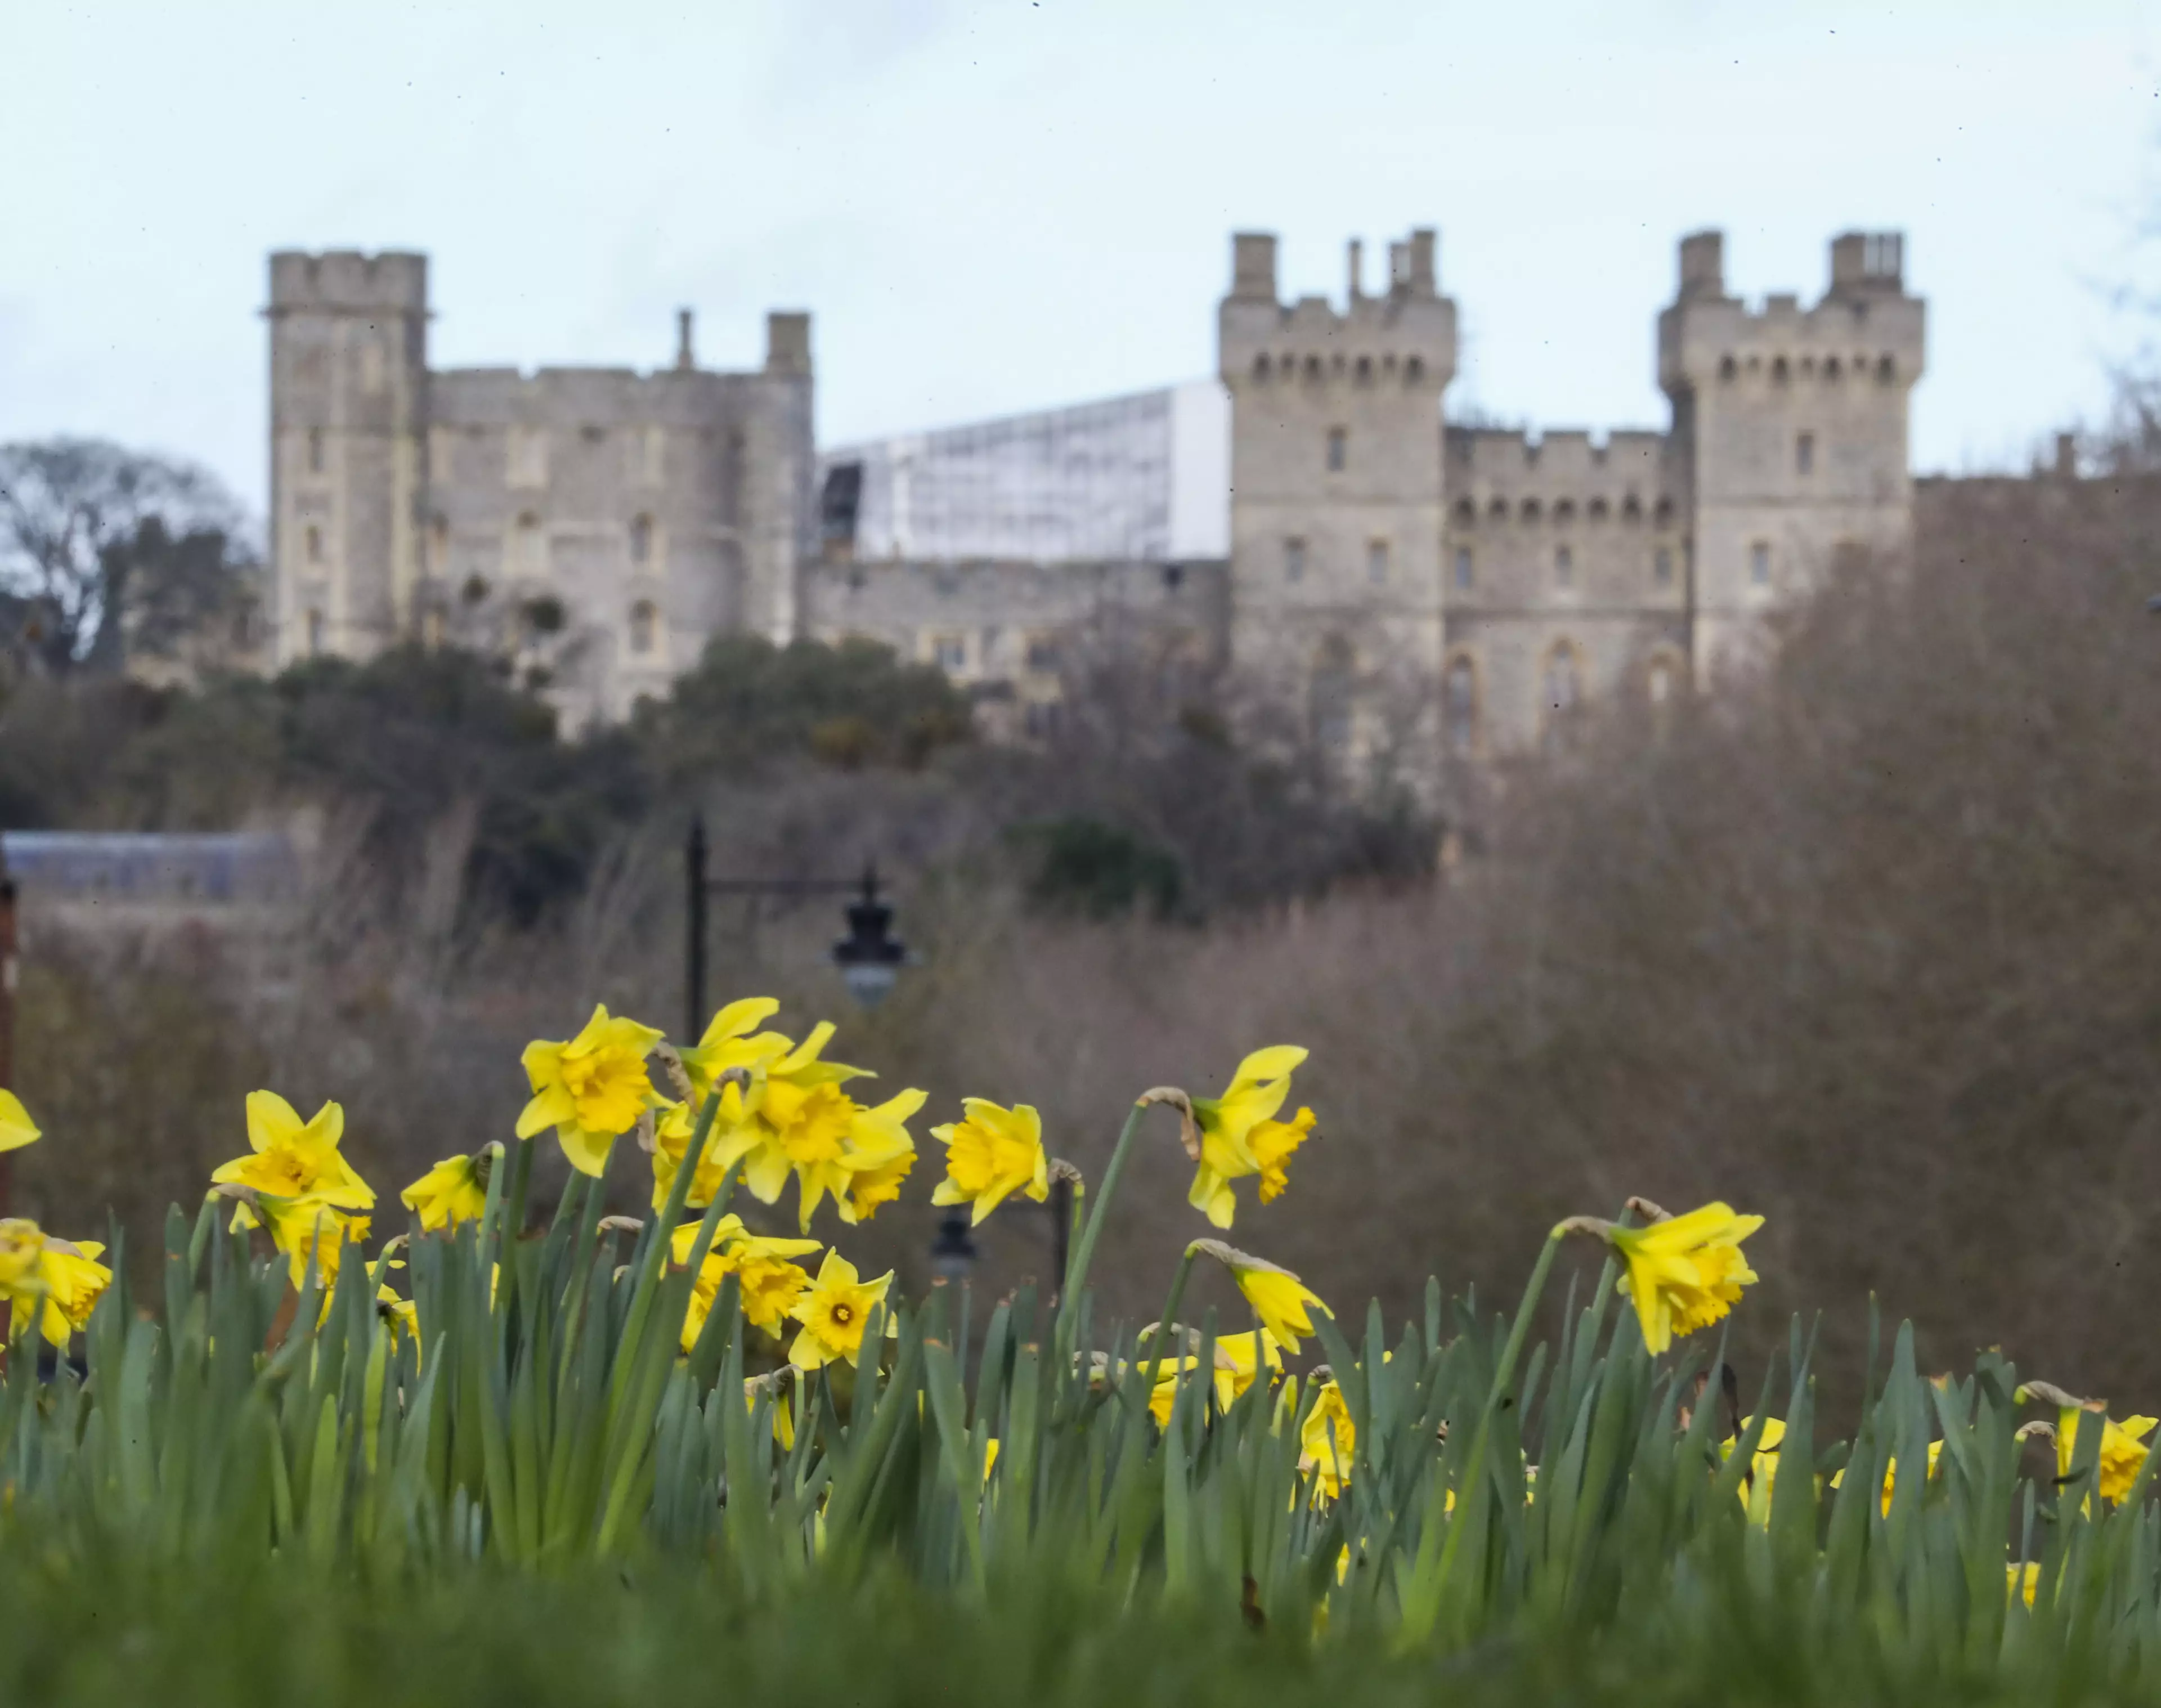 Could Windsor Castle be your new place of work?